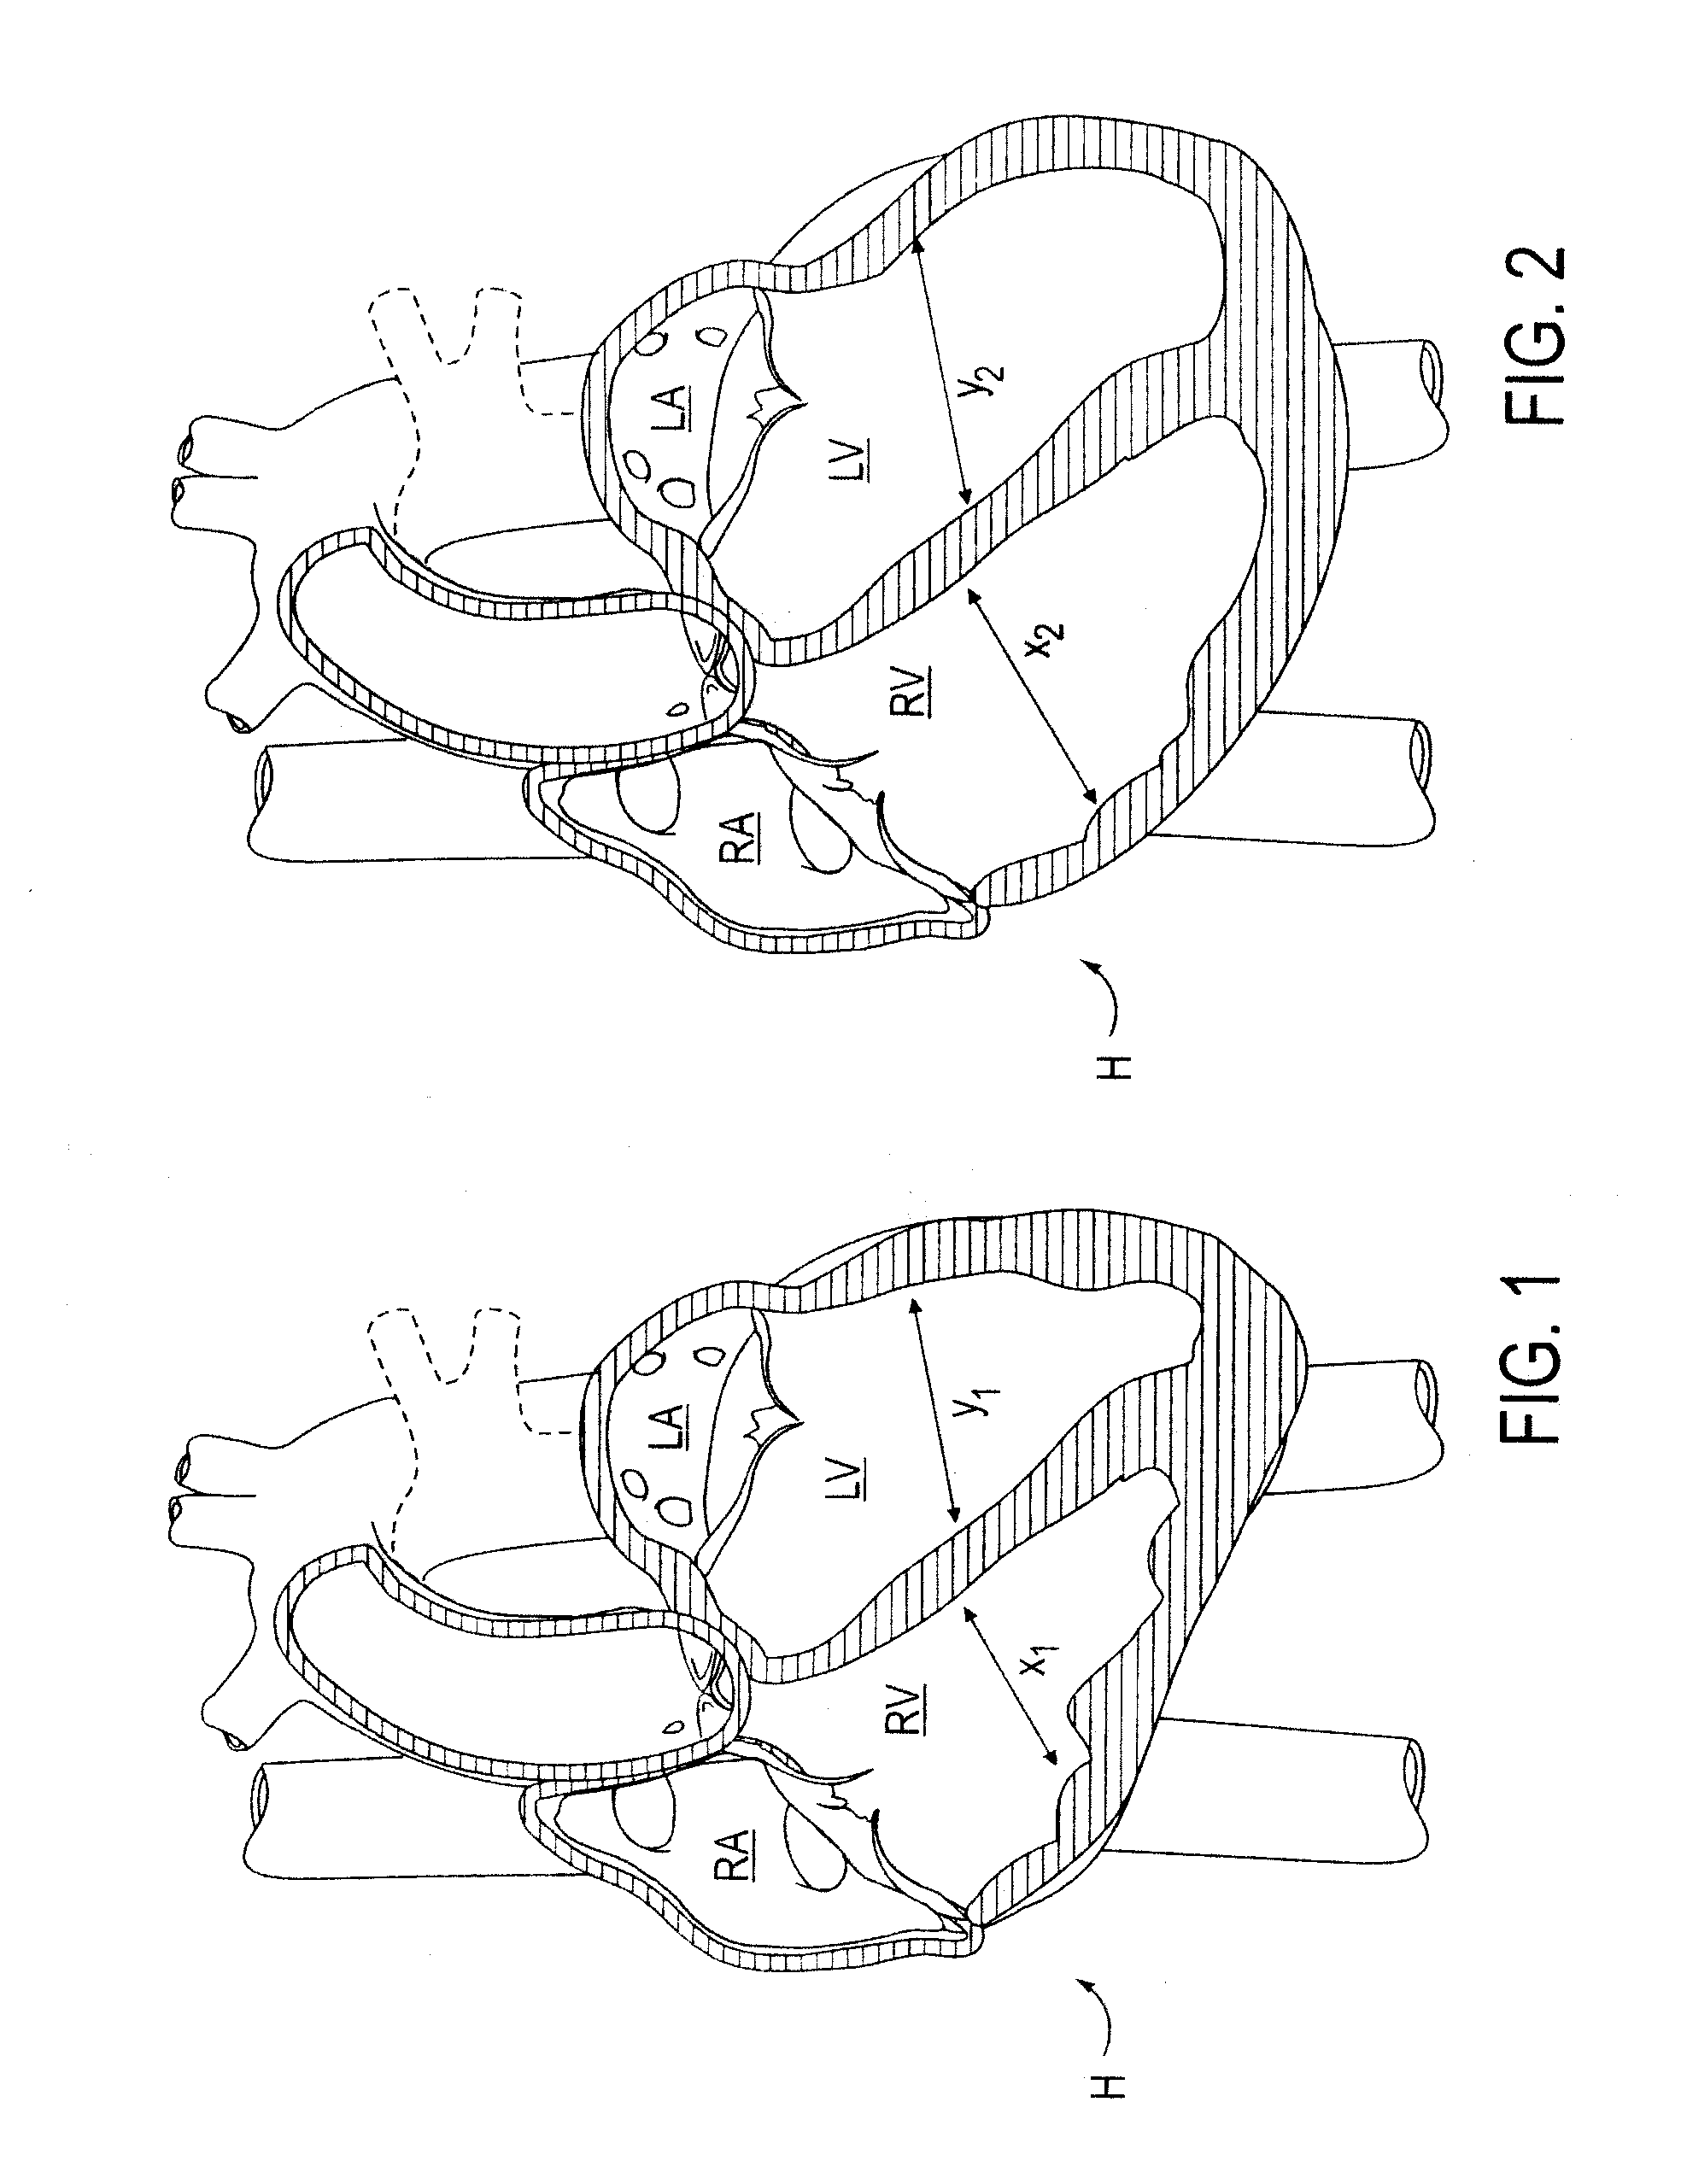 Methods and systems for cardiac remodeling via resynchronization